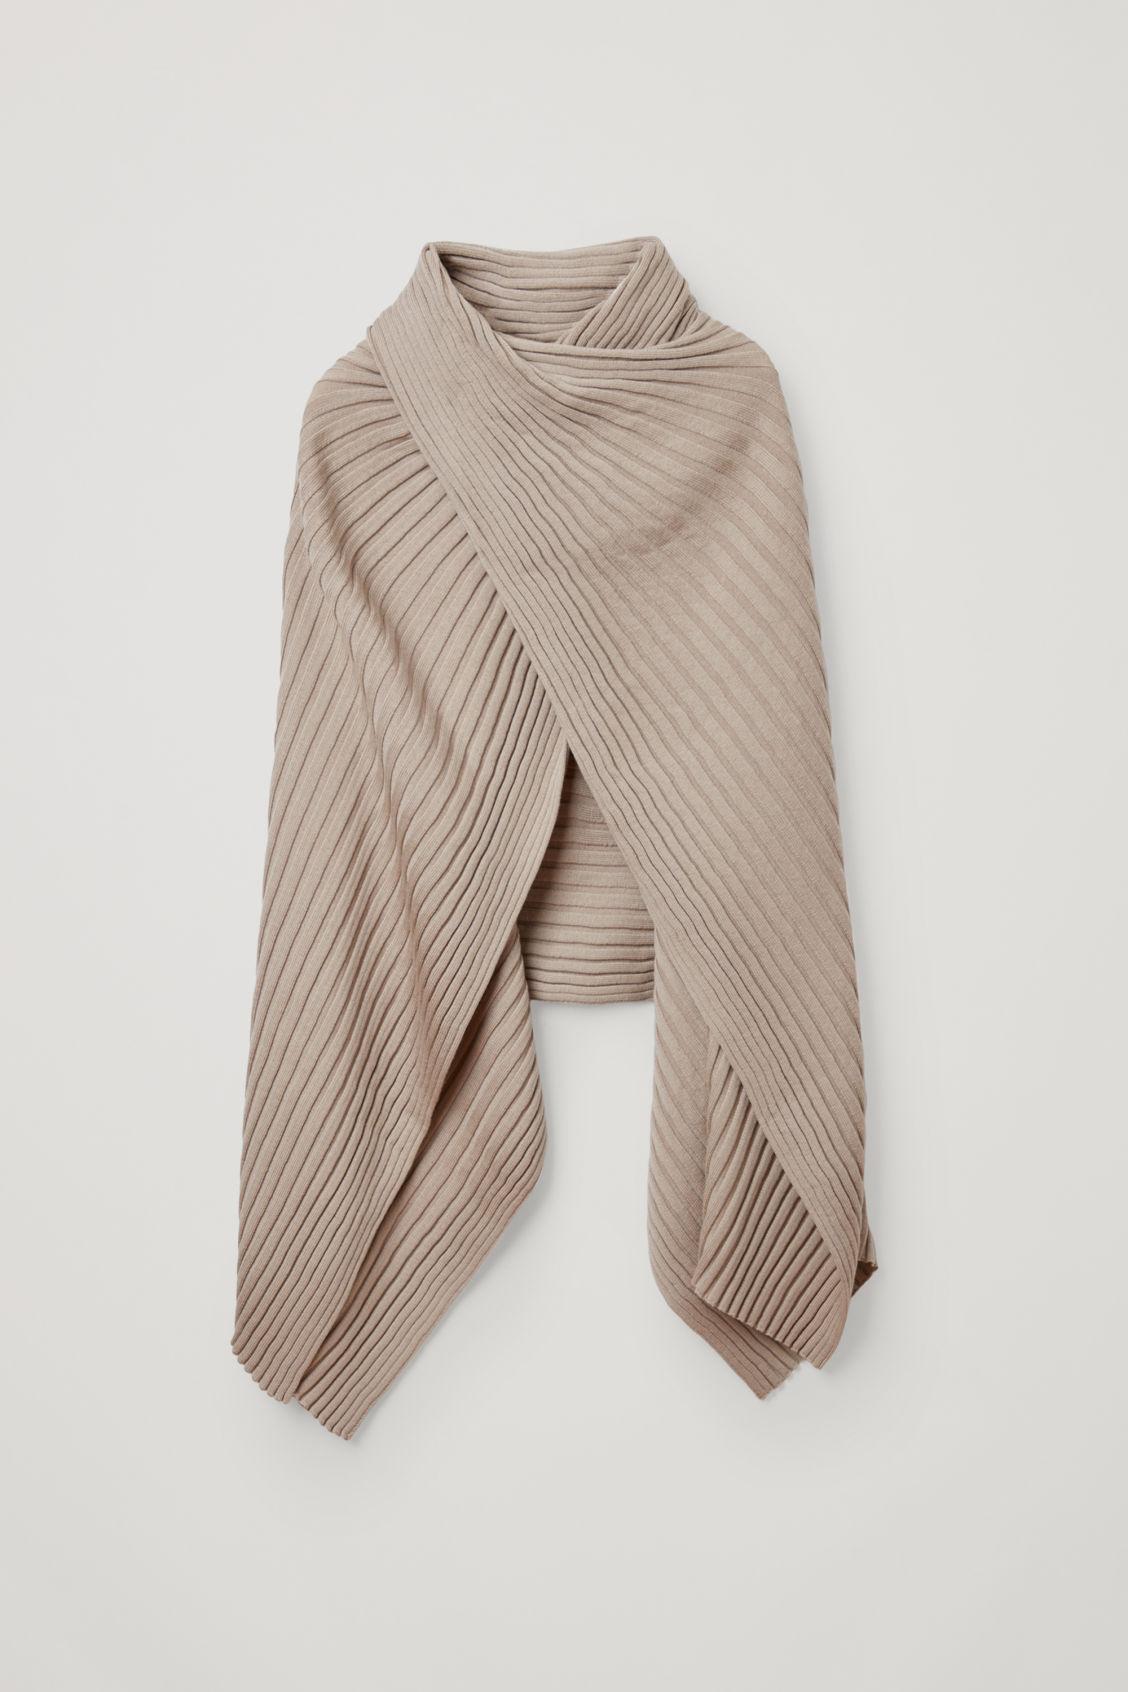 COS Ribbed Wool Hybrid Scarf in Natural | Lyst